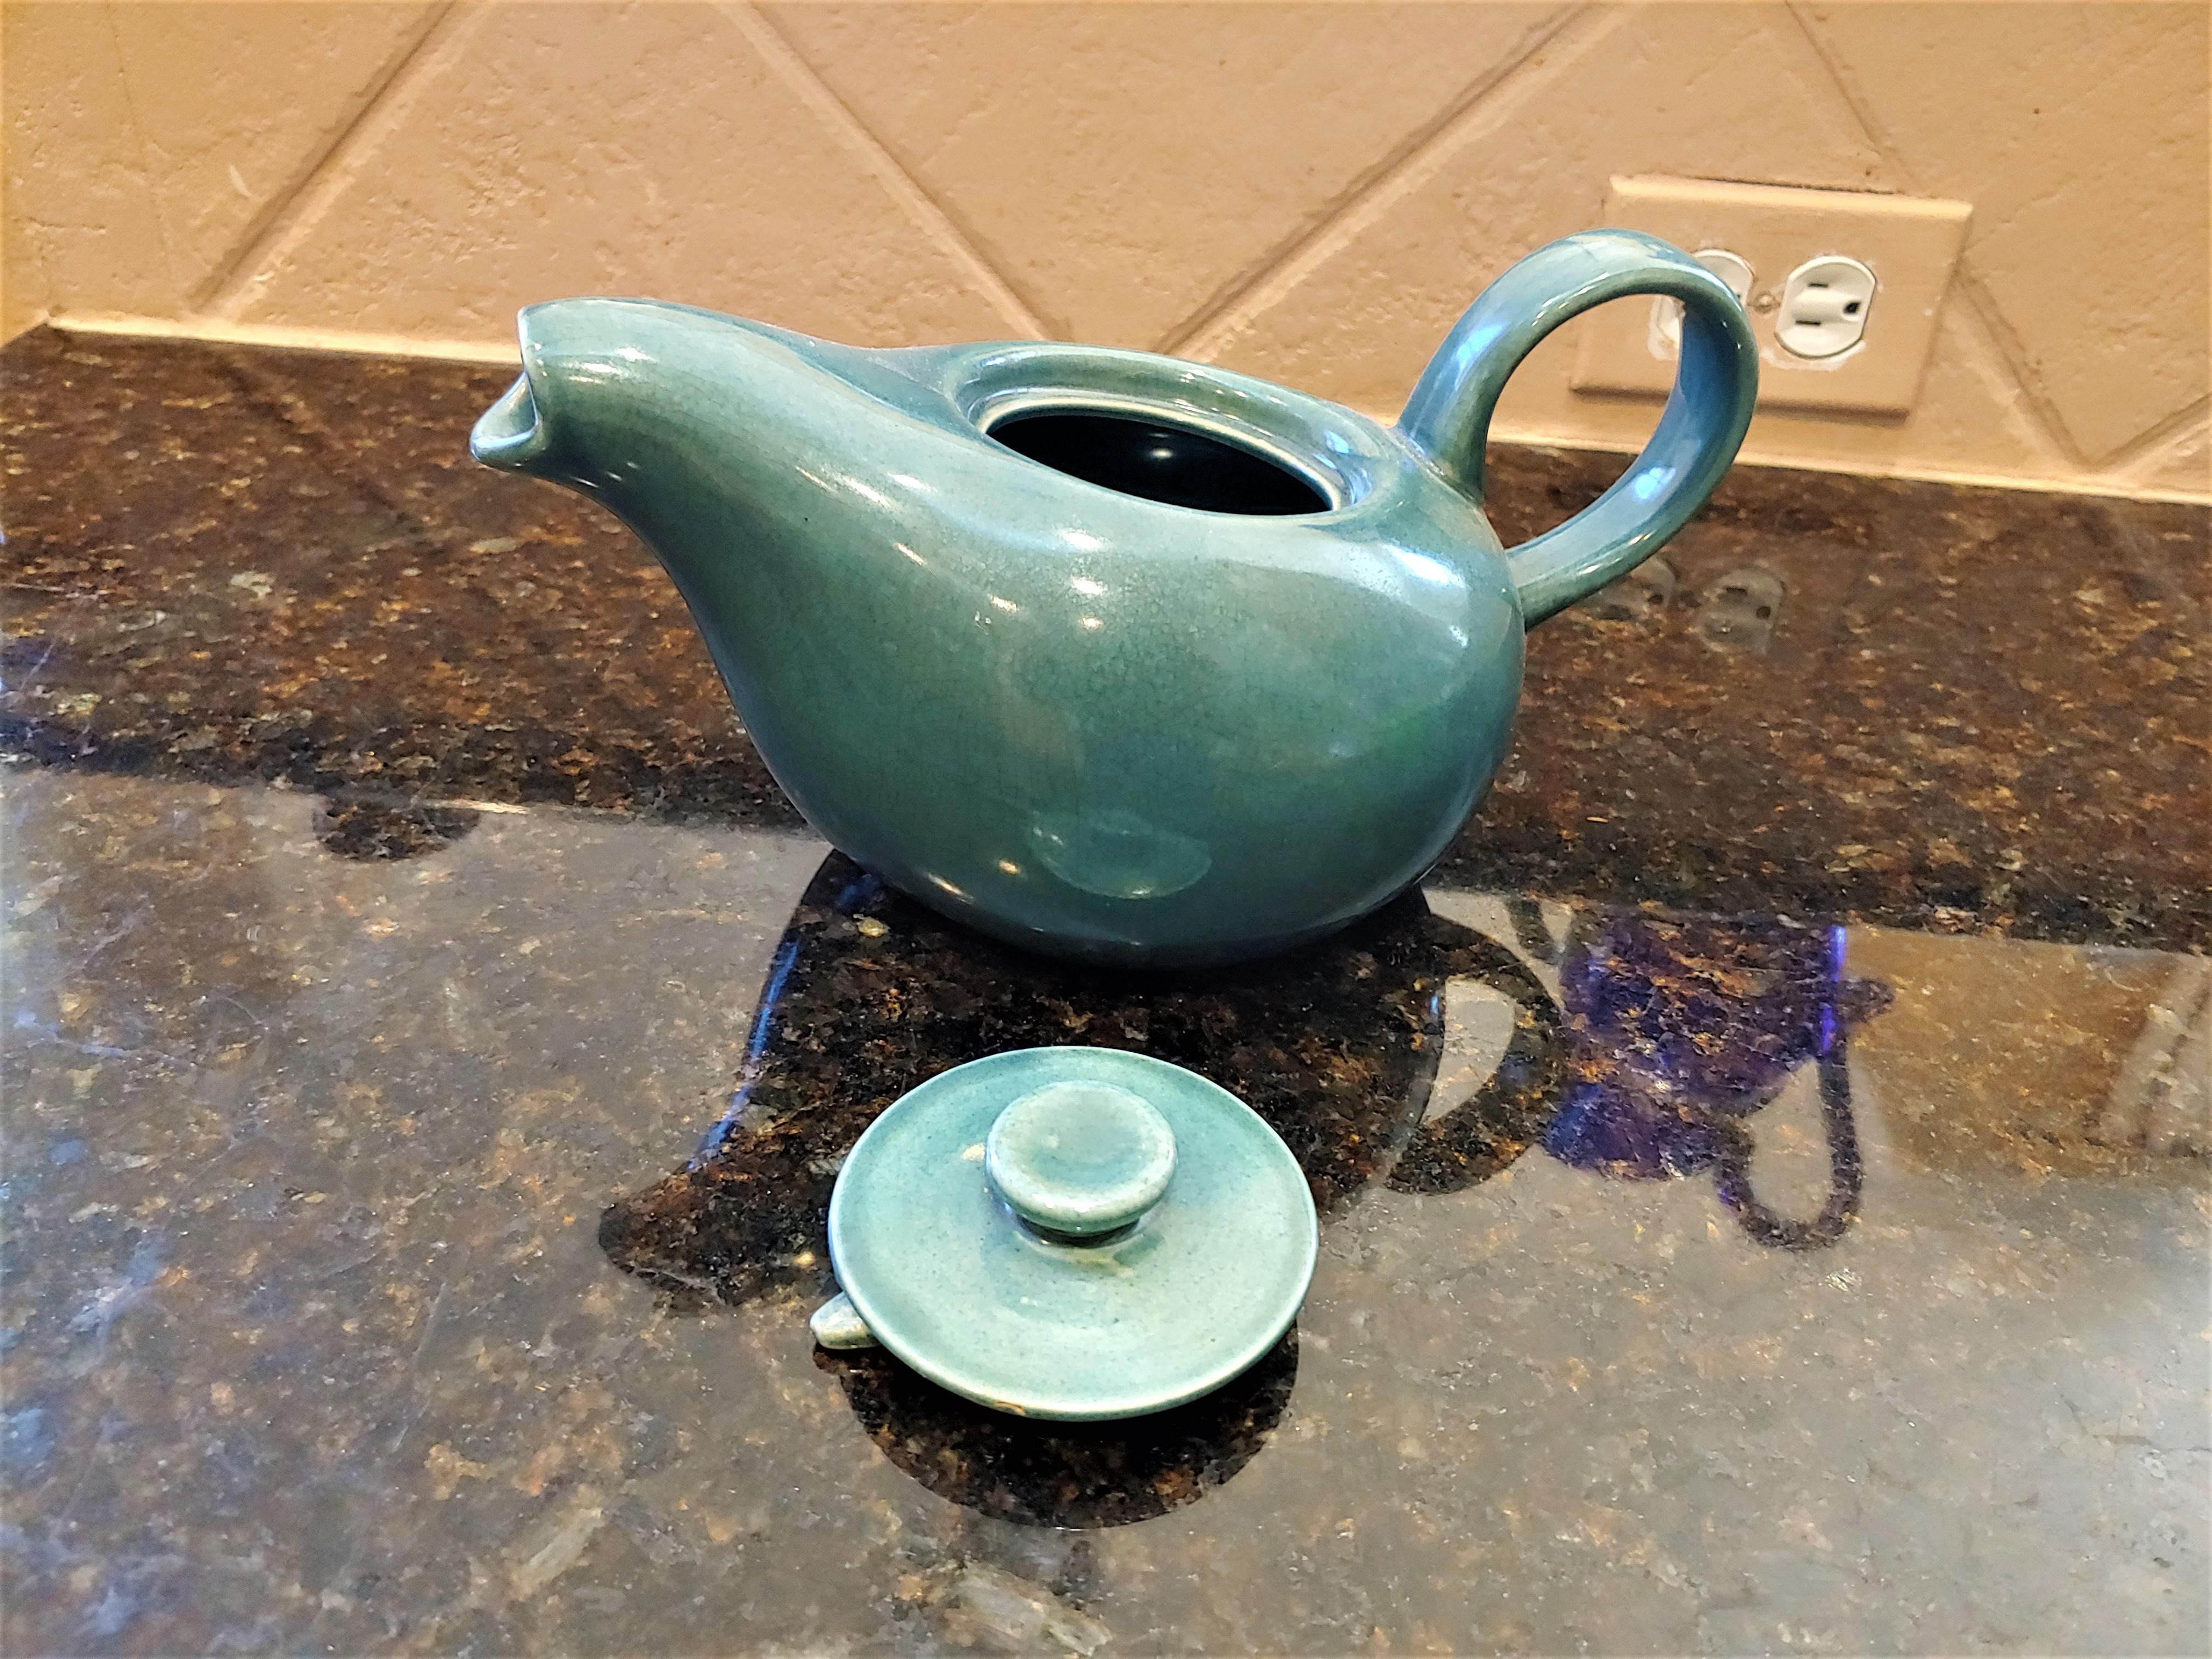 MCM Russel Wright Tea Service in Robin's Egg Blue In Good Condition For Sale In Austin, TX